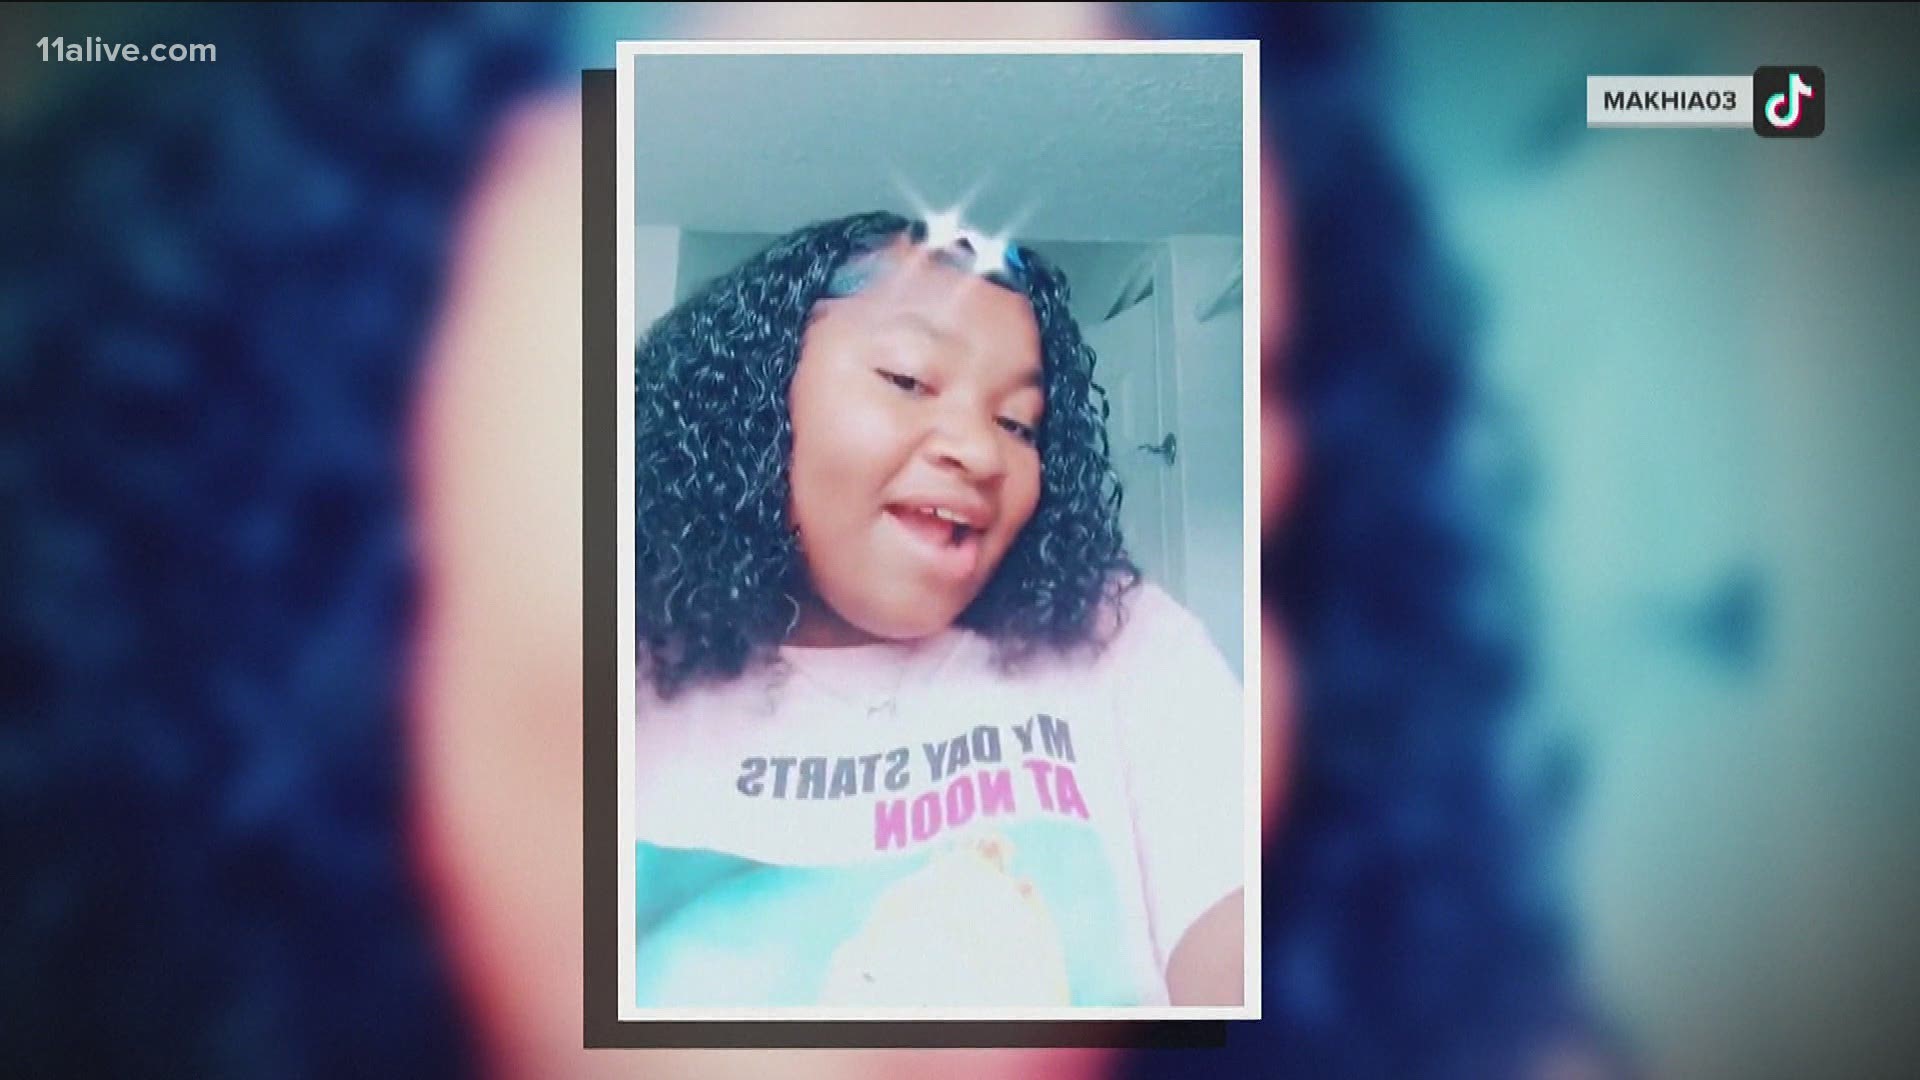 The teen was shot and killed by police in Columbus, Ohio this week.